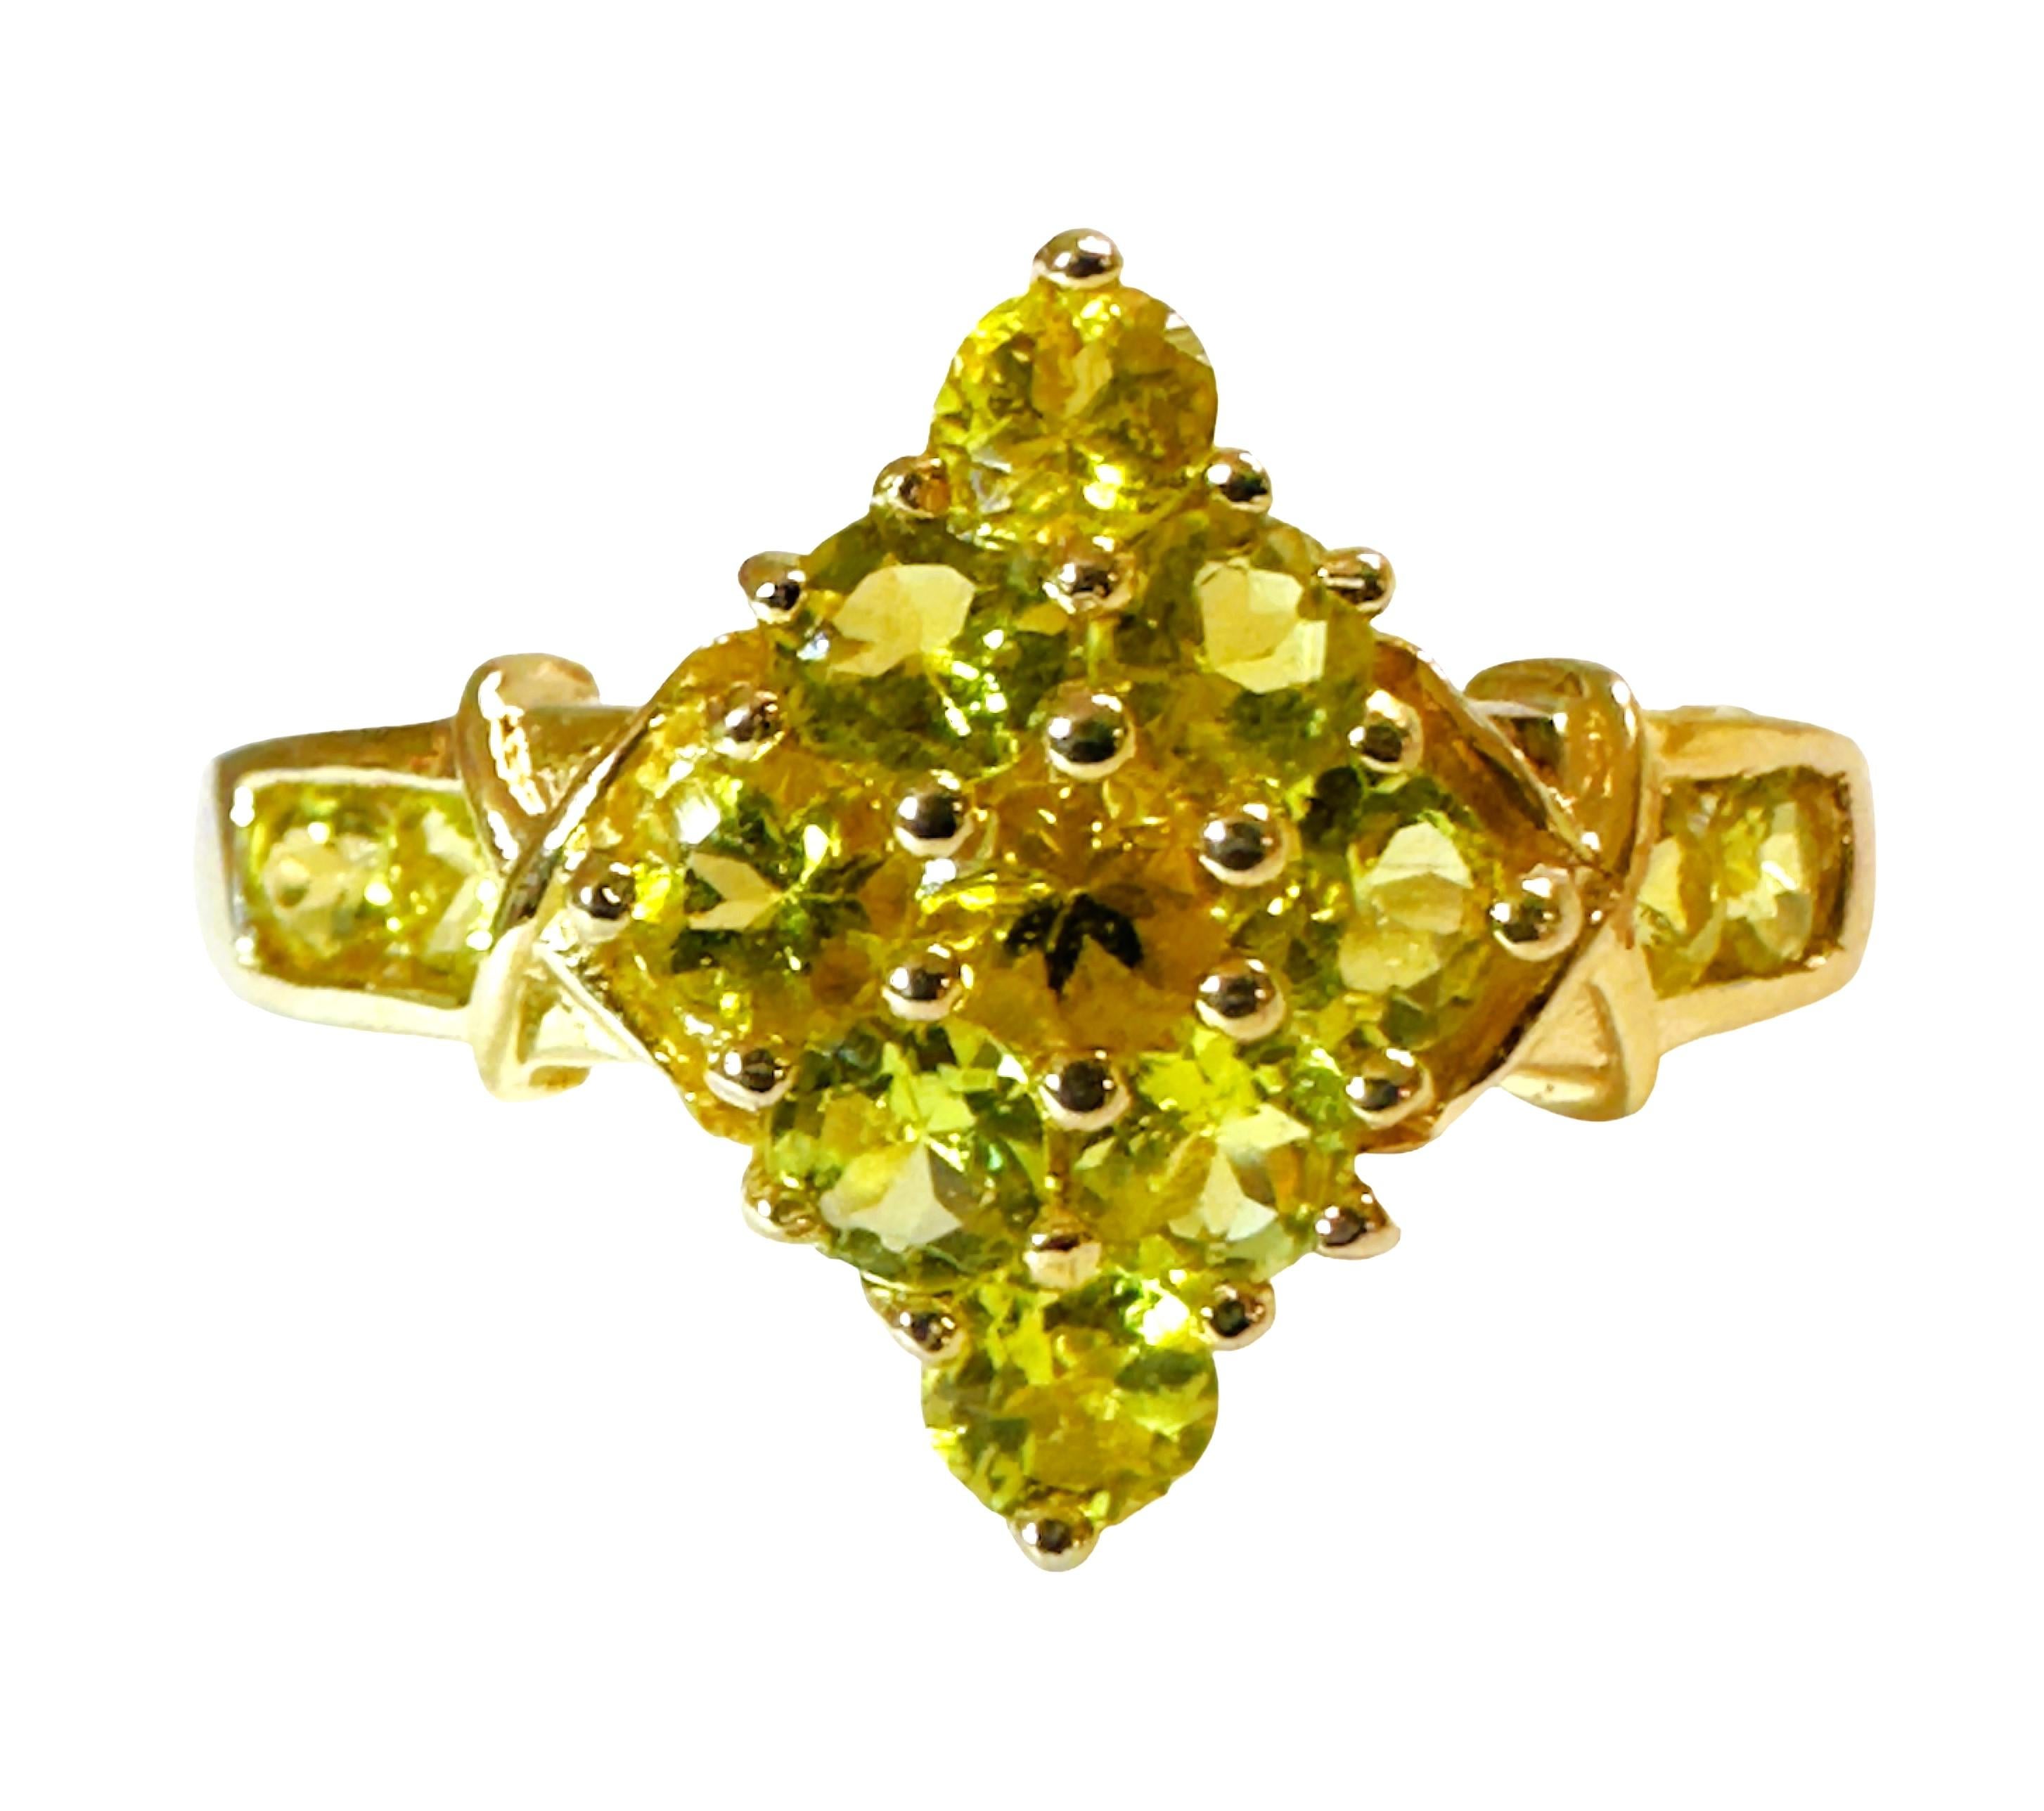 What a stunning ring!   The color of these stones is just gorgeous!  They are Lemon Citrine or otherwise called Green Citrine.  It's such a rare color of stone. The ring is a size 6.75.   It has 13 beautiful round cut citrine stones, 9 are showcased